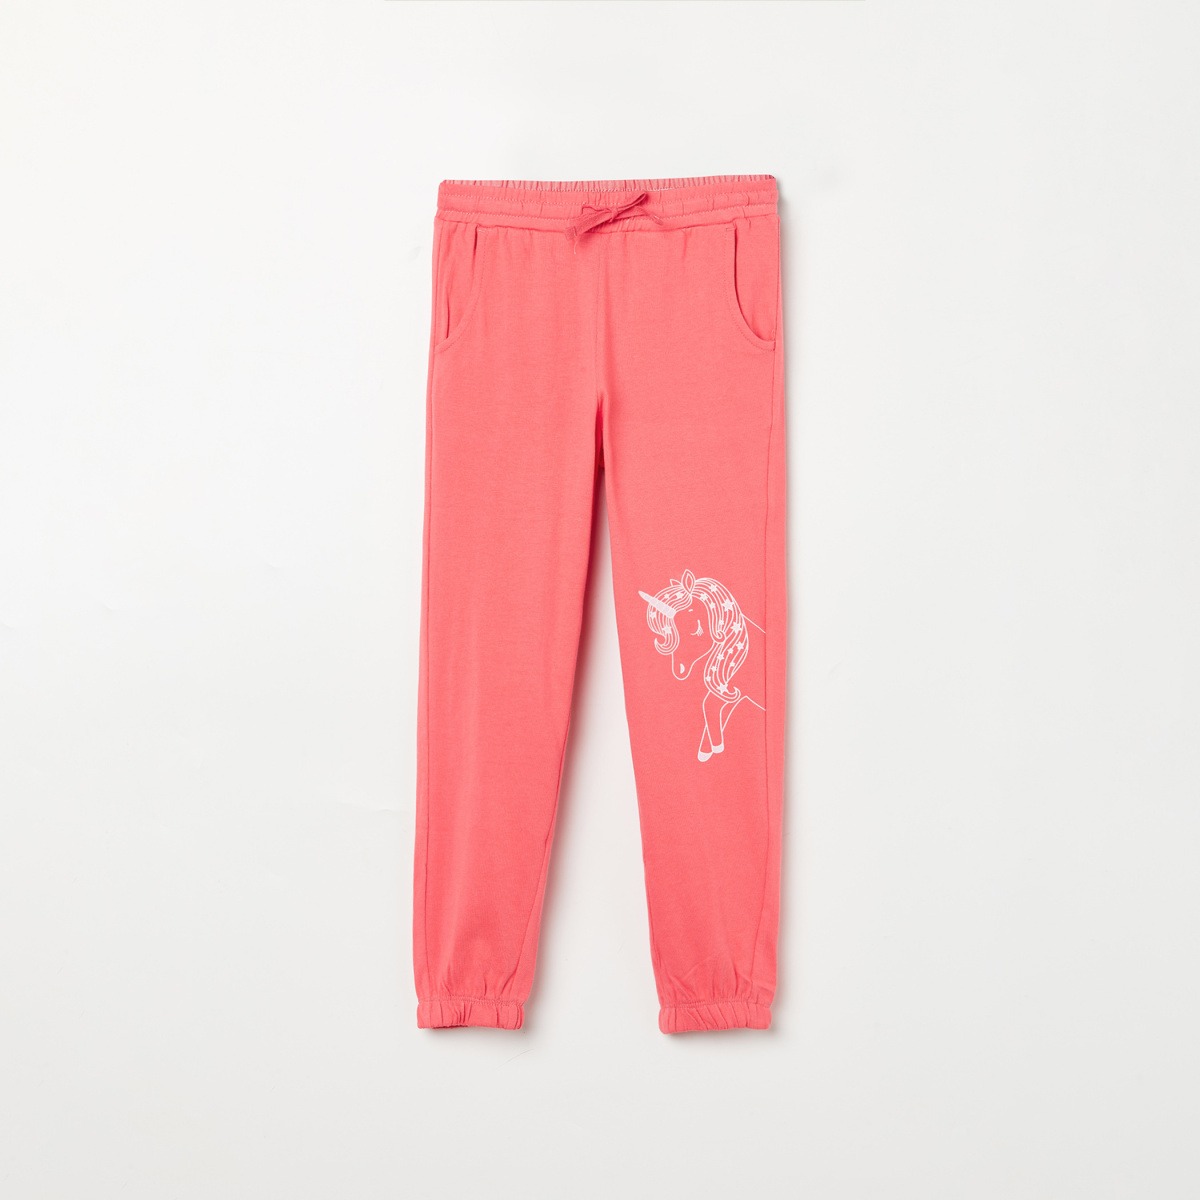 FAME FOREVER YOUNG Girls Printed Joggers